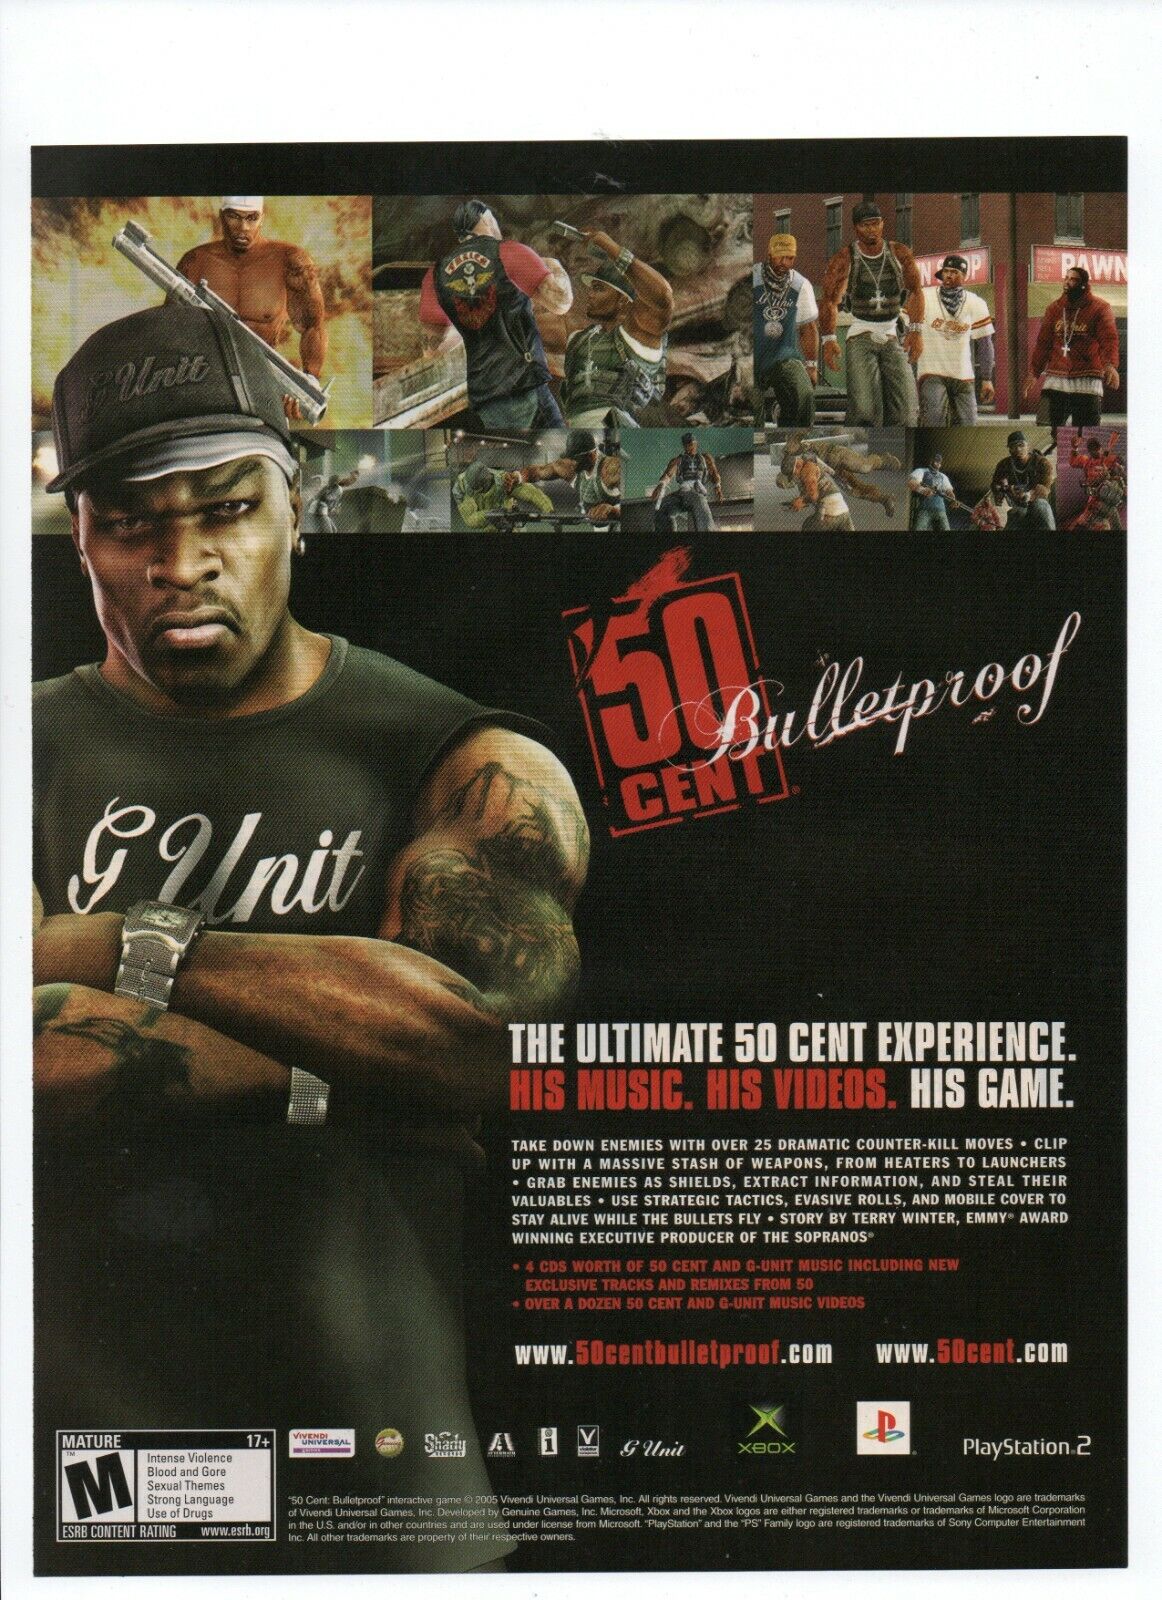 50 Cent Bulletproof Playstation PS2 XBOX Rapper - 2005 Video Game Print Ad